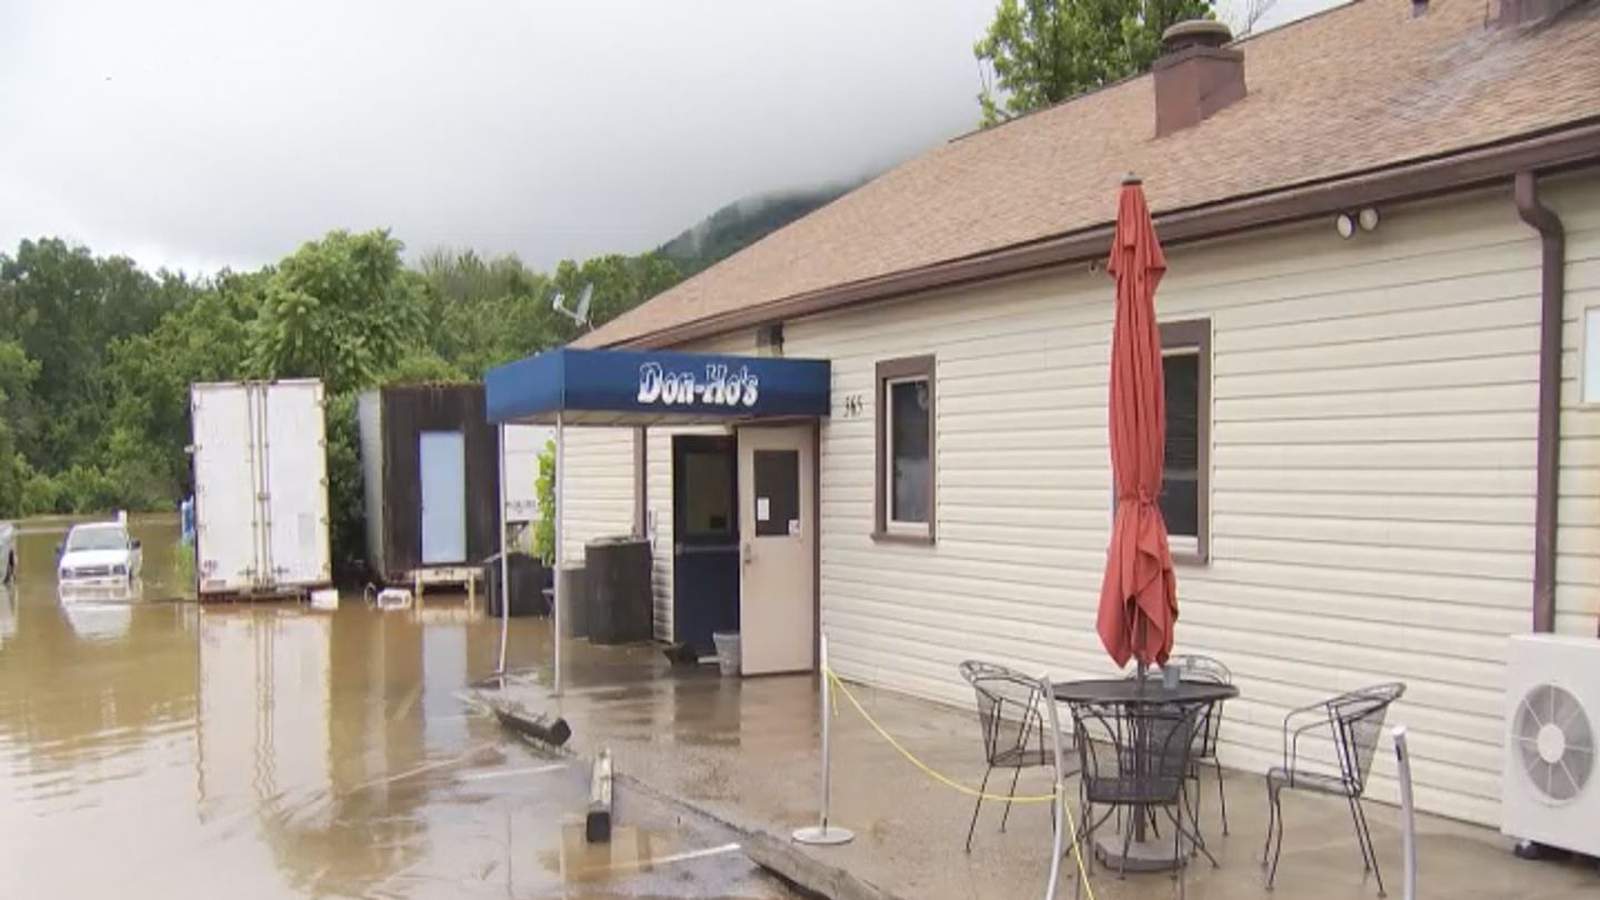 Hollins restaurant will be closed for a few weeks after flooding